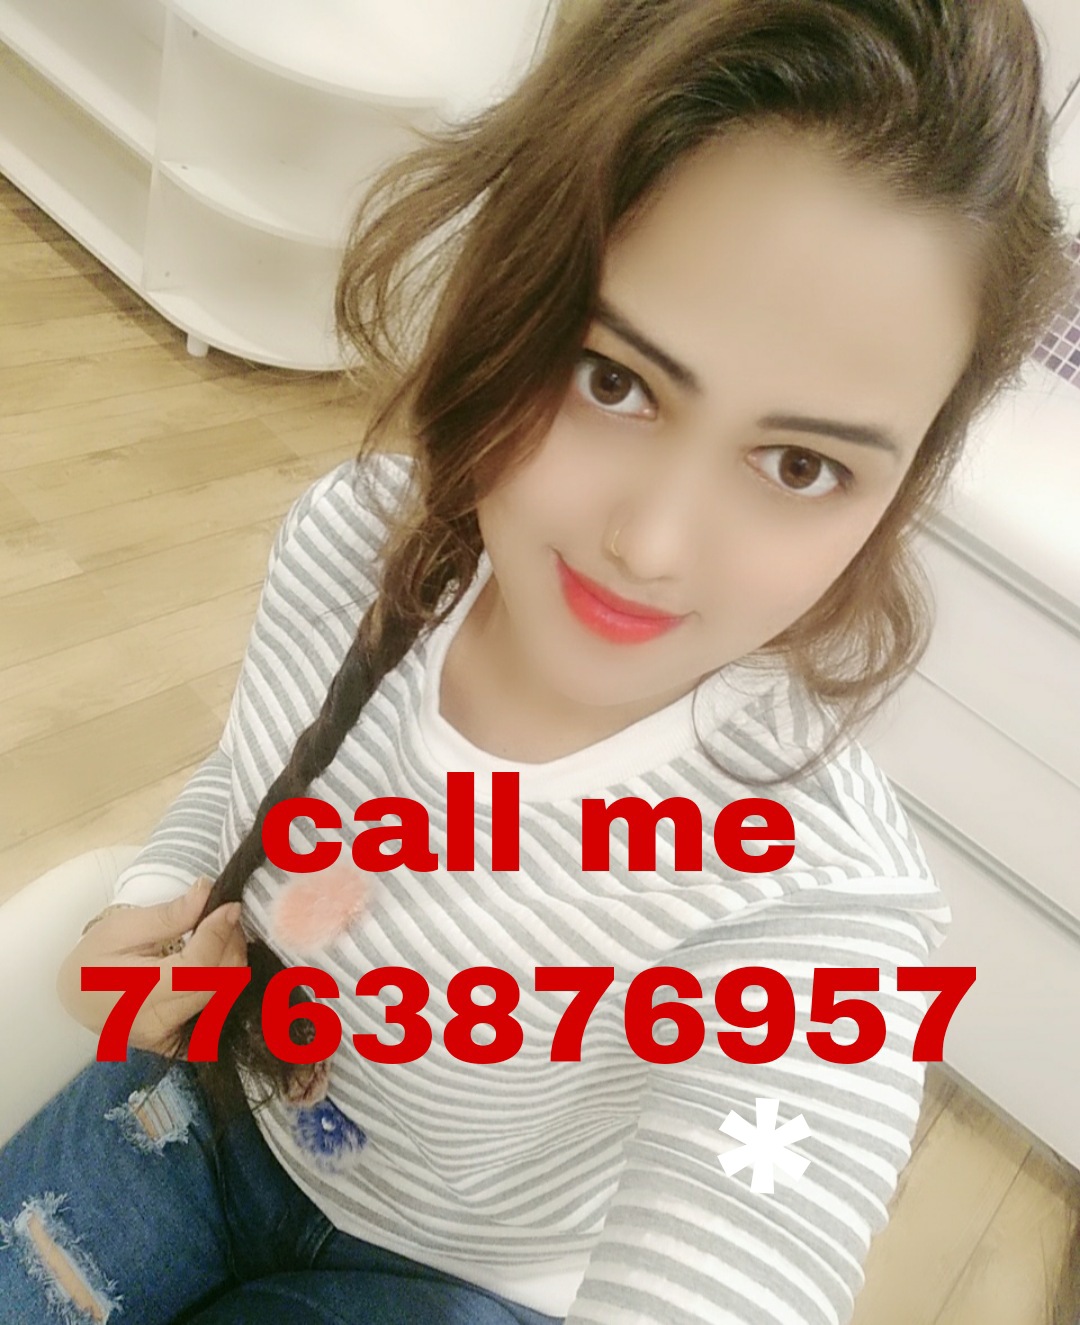 DURGAPUR CALL GIRL LOW PRICE CASH PAYMENT FULL SAFE AND SECURE SERVICE